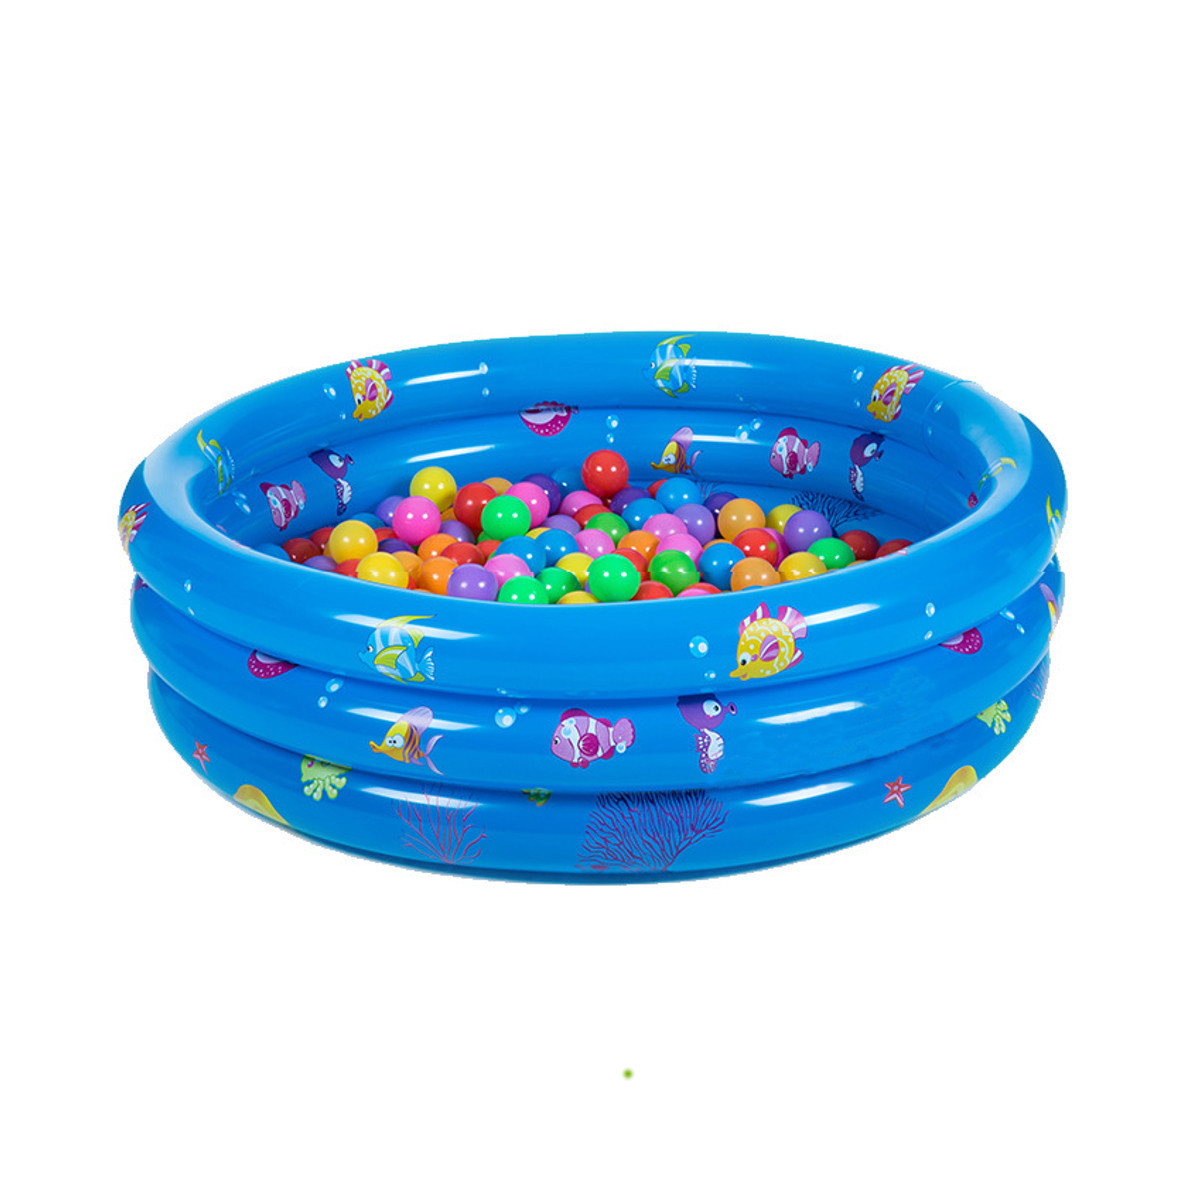 80CM-3-Ring-Inflatable-Round-Swimming-Pool-Toddler-Children-Kids-Outdoor-Play-Balls-1245092-4